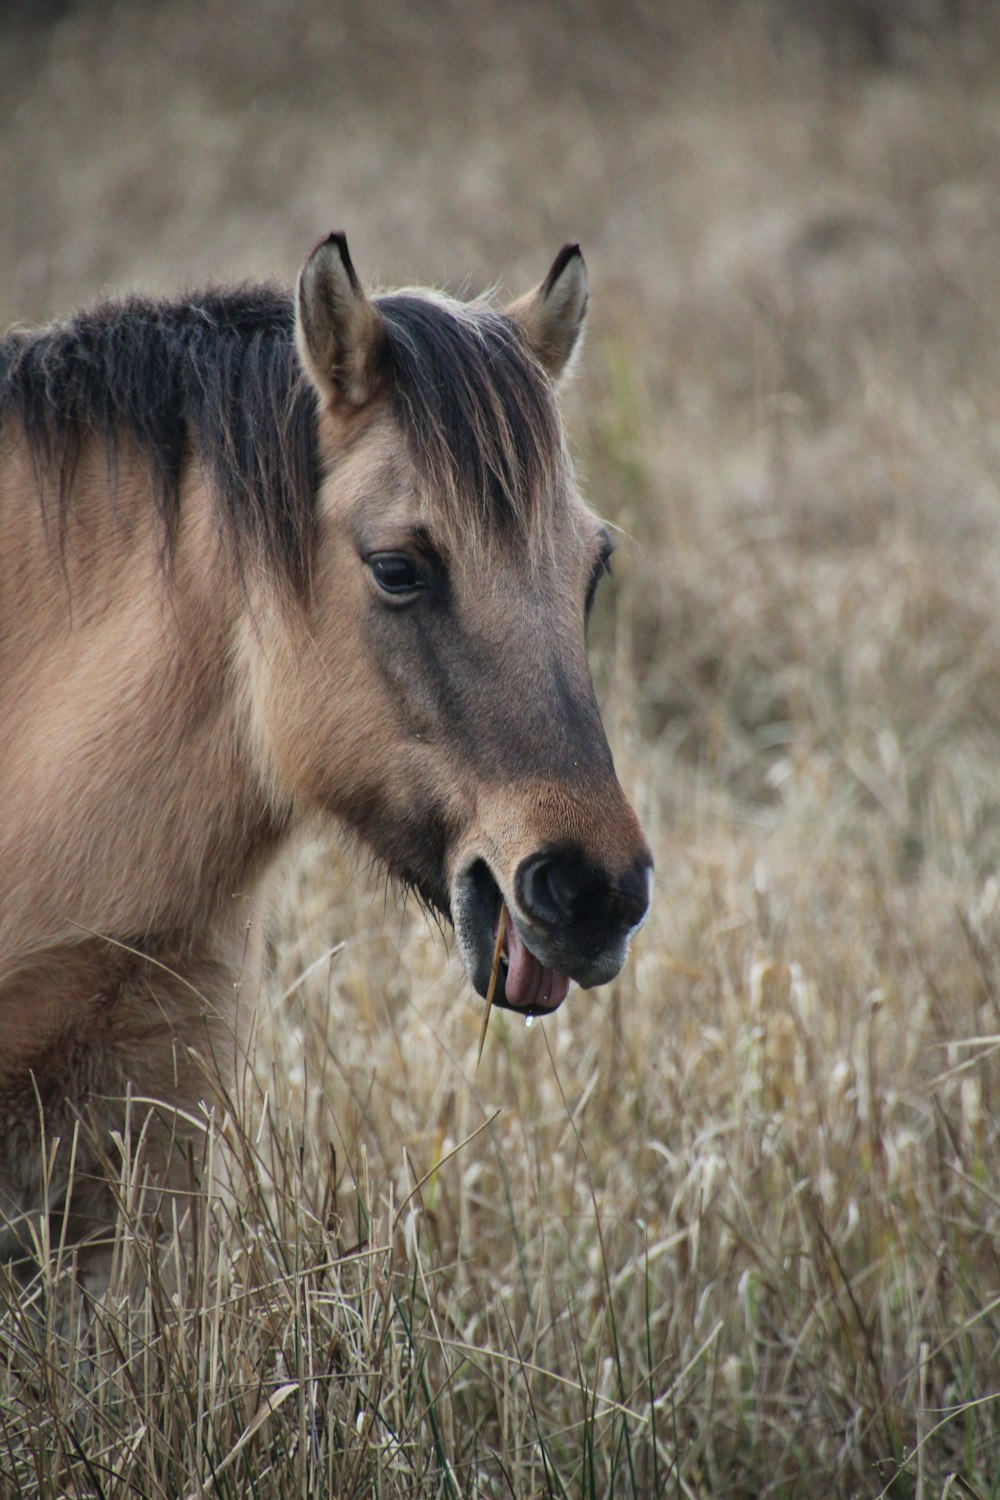 a horse with its mouth open standing in a field